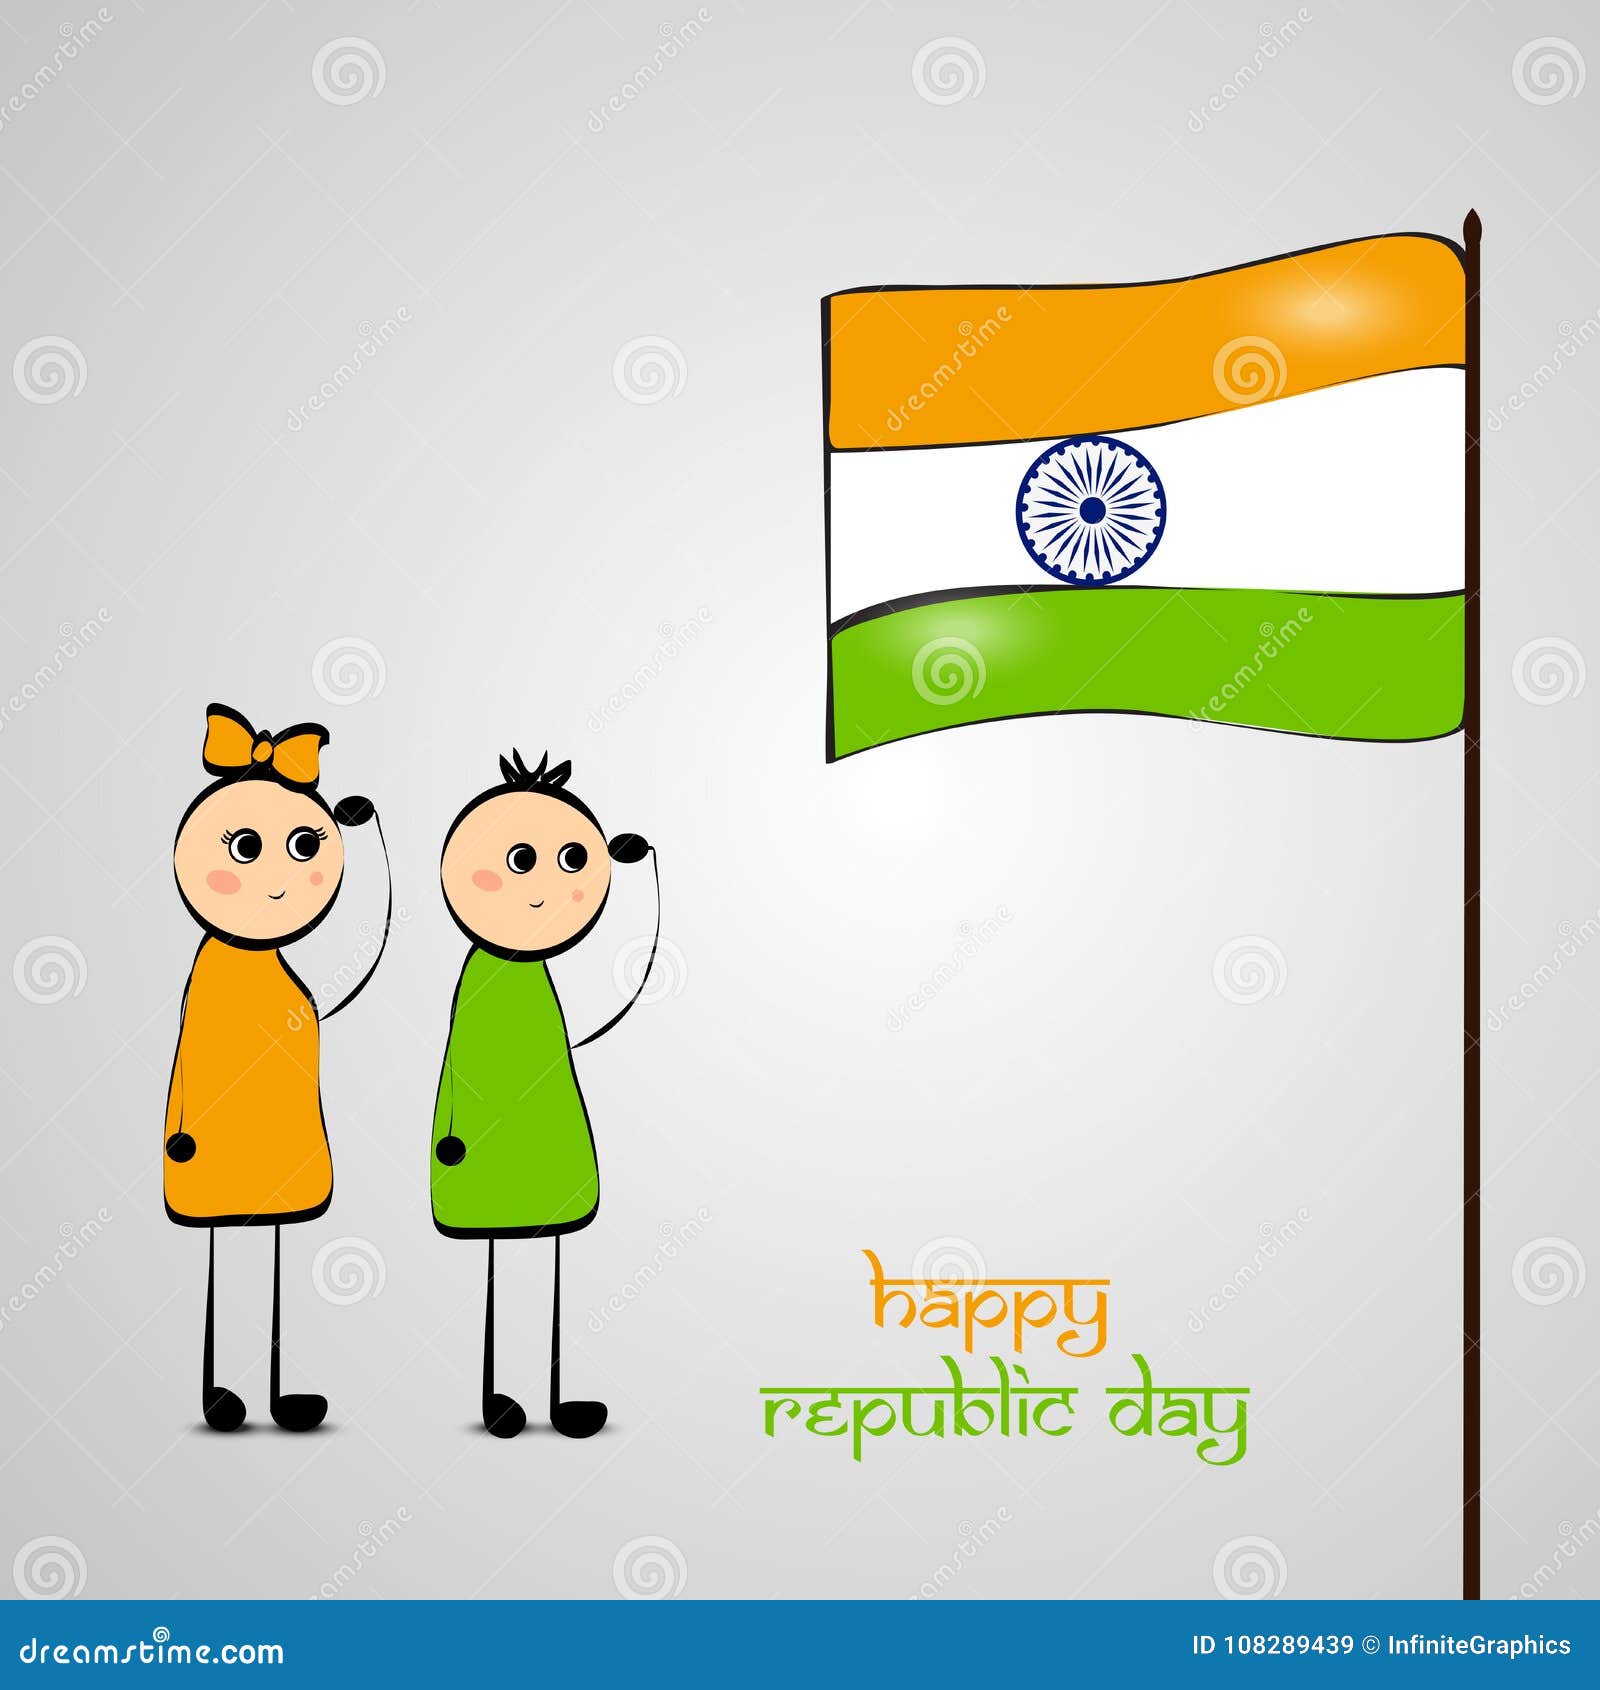 Republic day drawing | Republic day poster drawing | Drawing for republic  day | Independence day drawing, Poster drawing, Drawing for kids